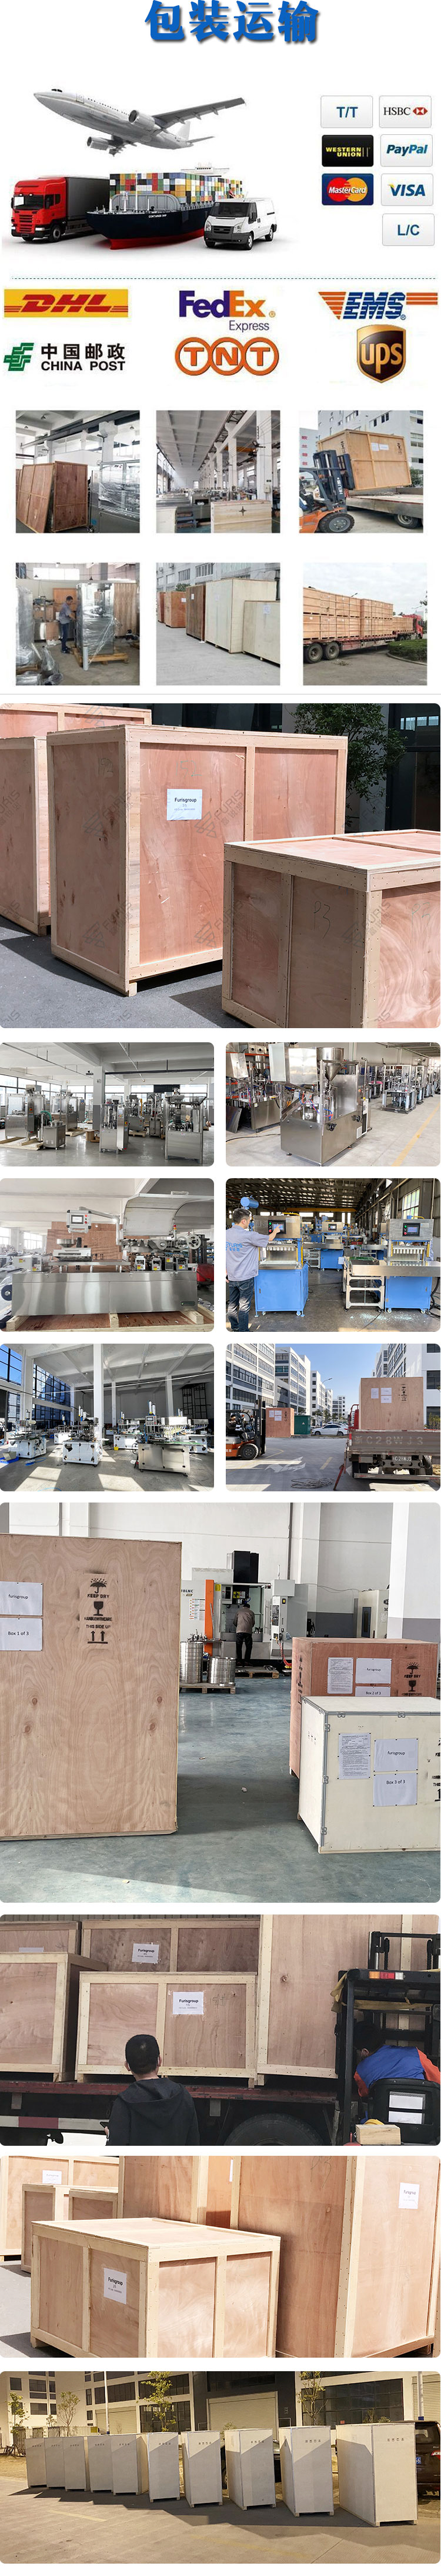 FRS-60 semi-automatic filling and sealing machine, fully automatic hose paste tube filling equipment, Furuisi